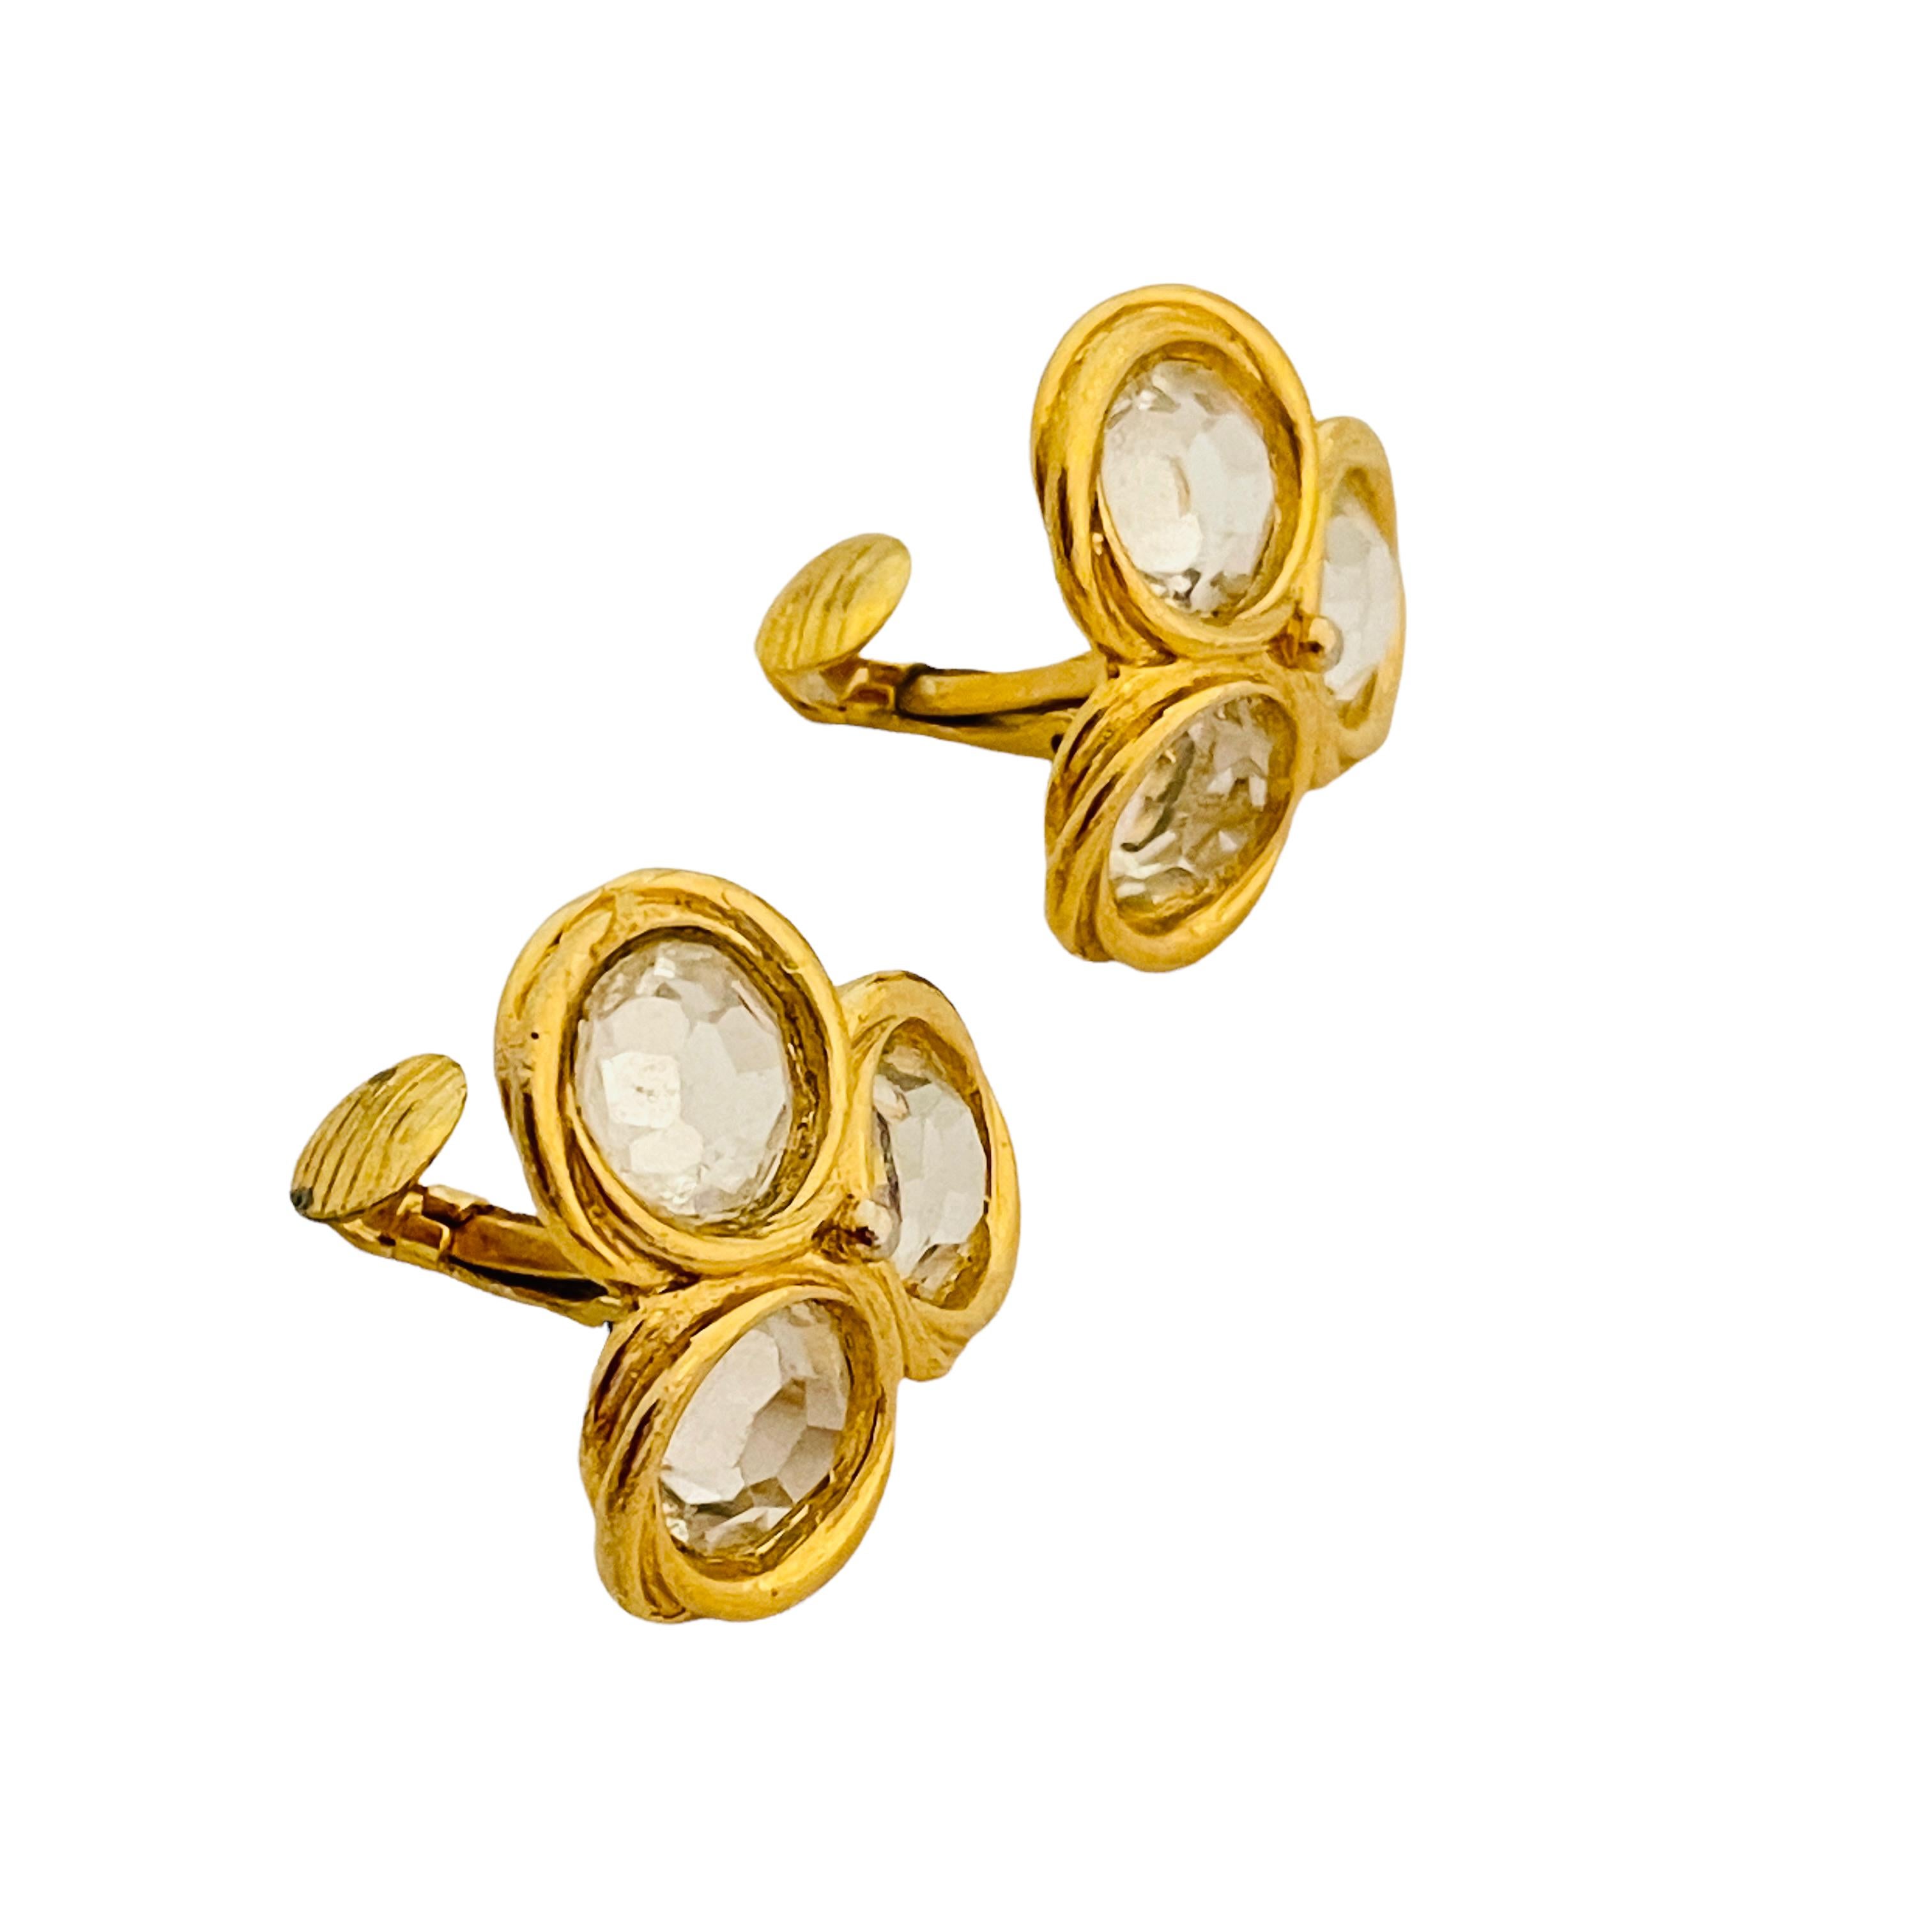 Vtg gold glass designer runway clip on earrings In Excellent Condition For Sale In Palos Hills, IL